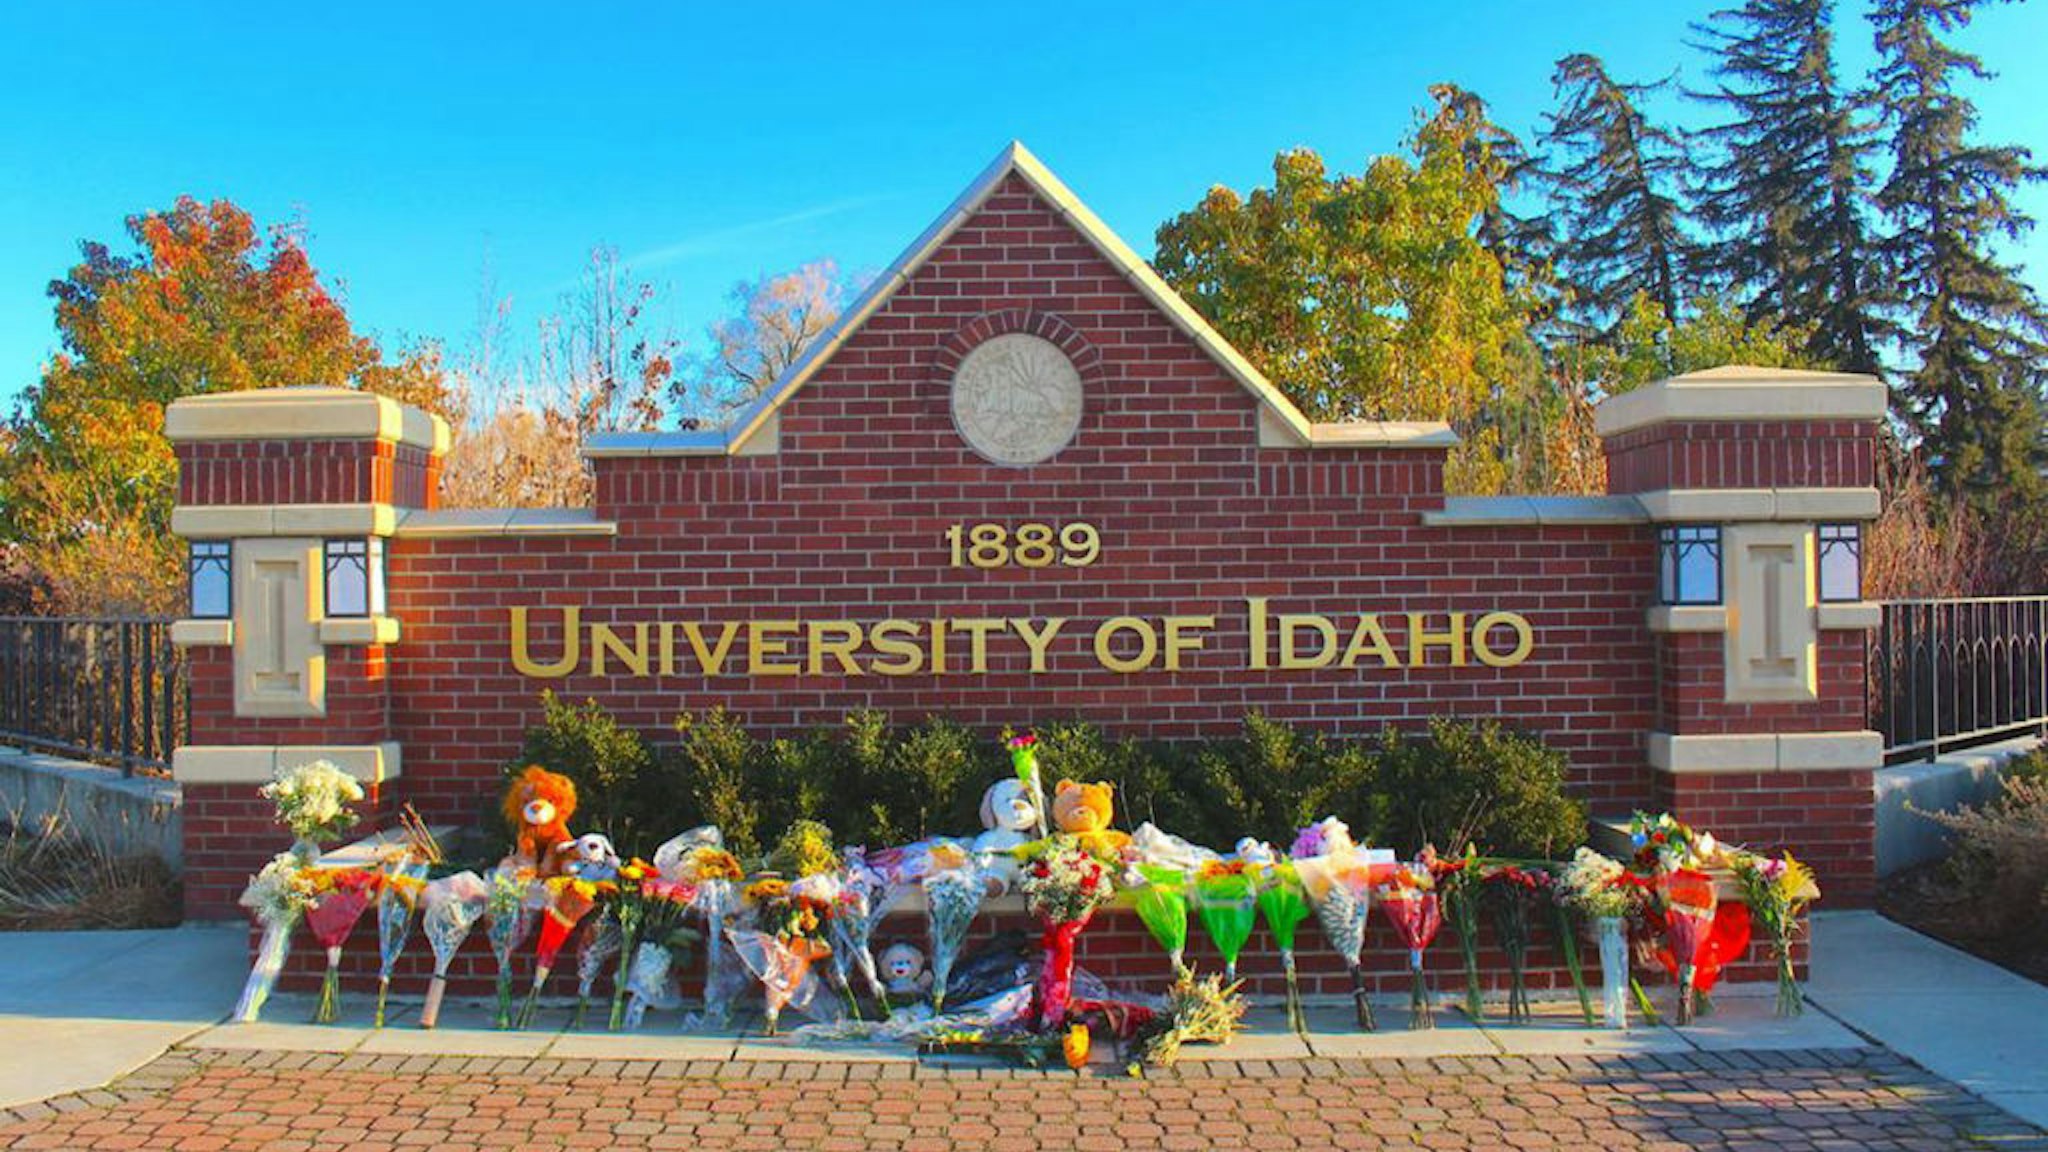 Flowers, notes and stuffed animals sit along the University of Idaho's entrance sign on Pullman Road in Moscow to honor the four students stabbed to death in an off-campus home on Nov. 13